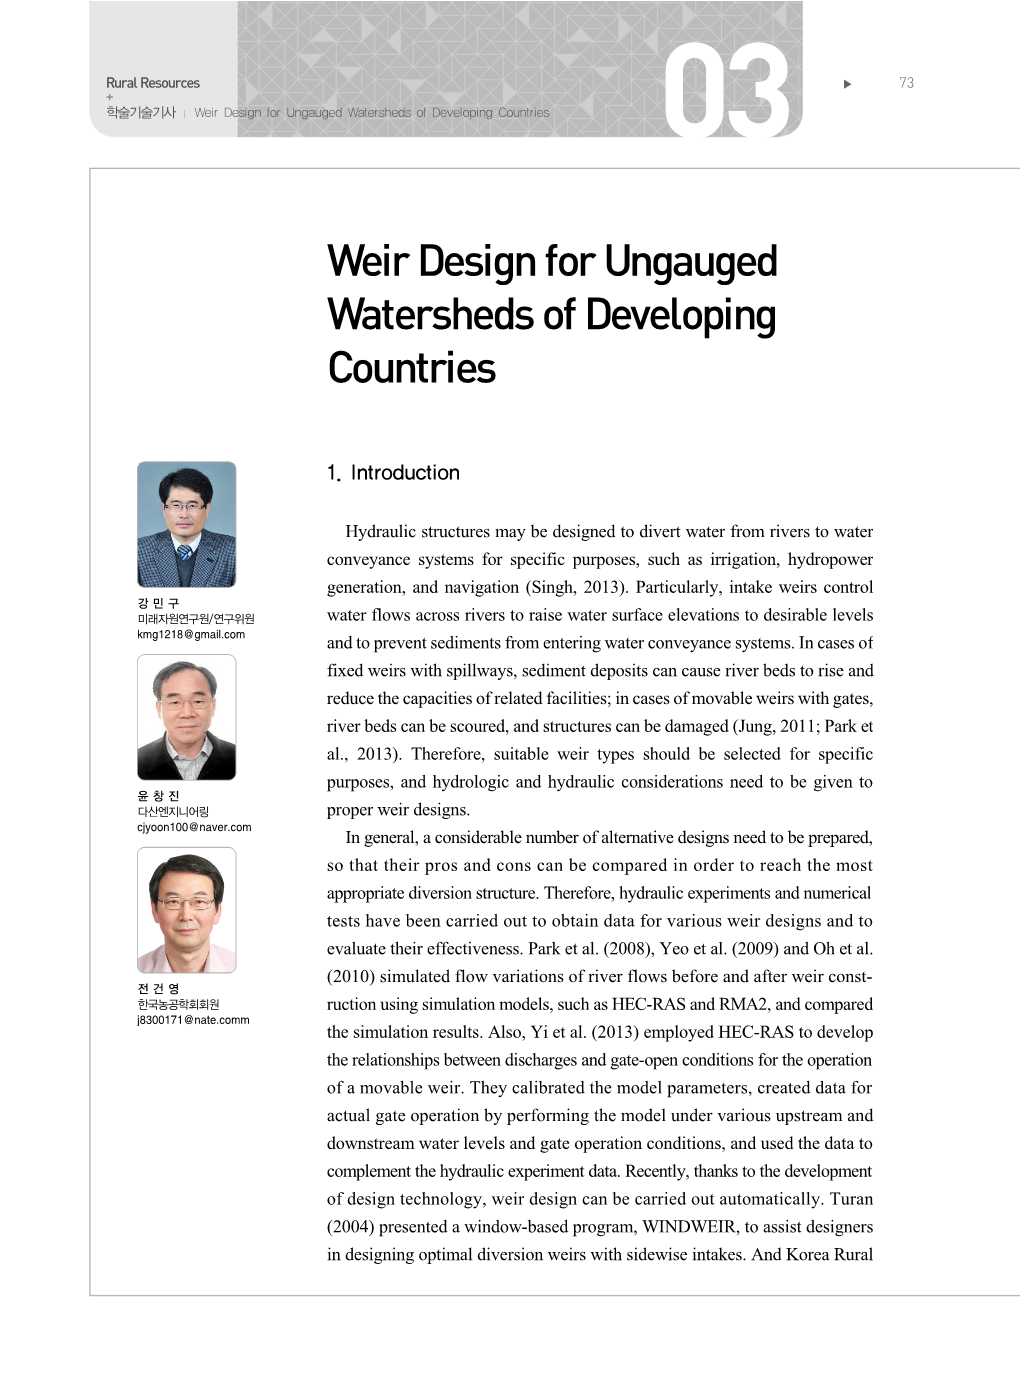 Weir Design for Ungauged Watersheds of Developing Countries 03